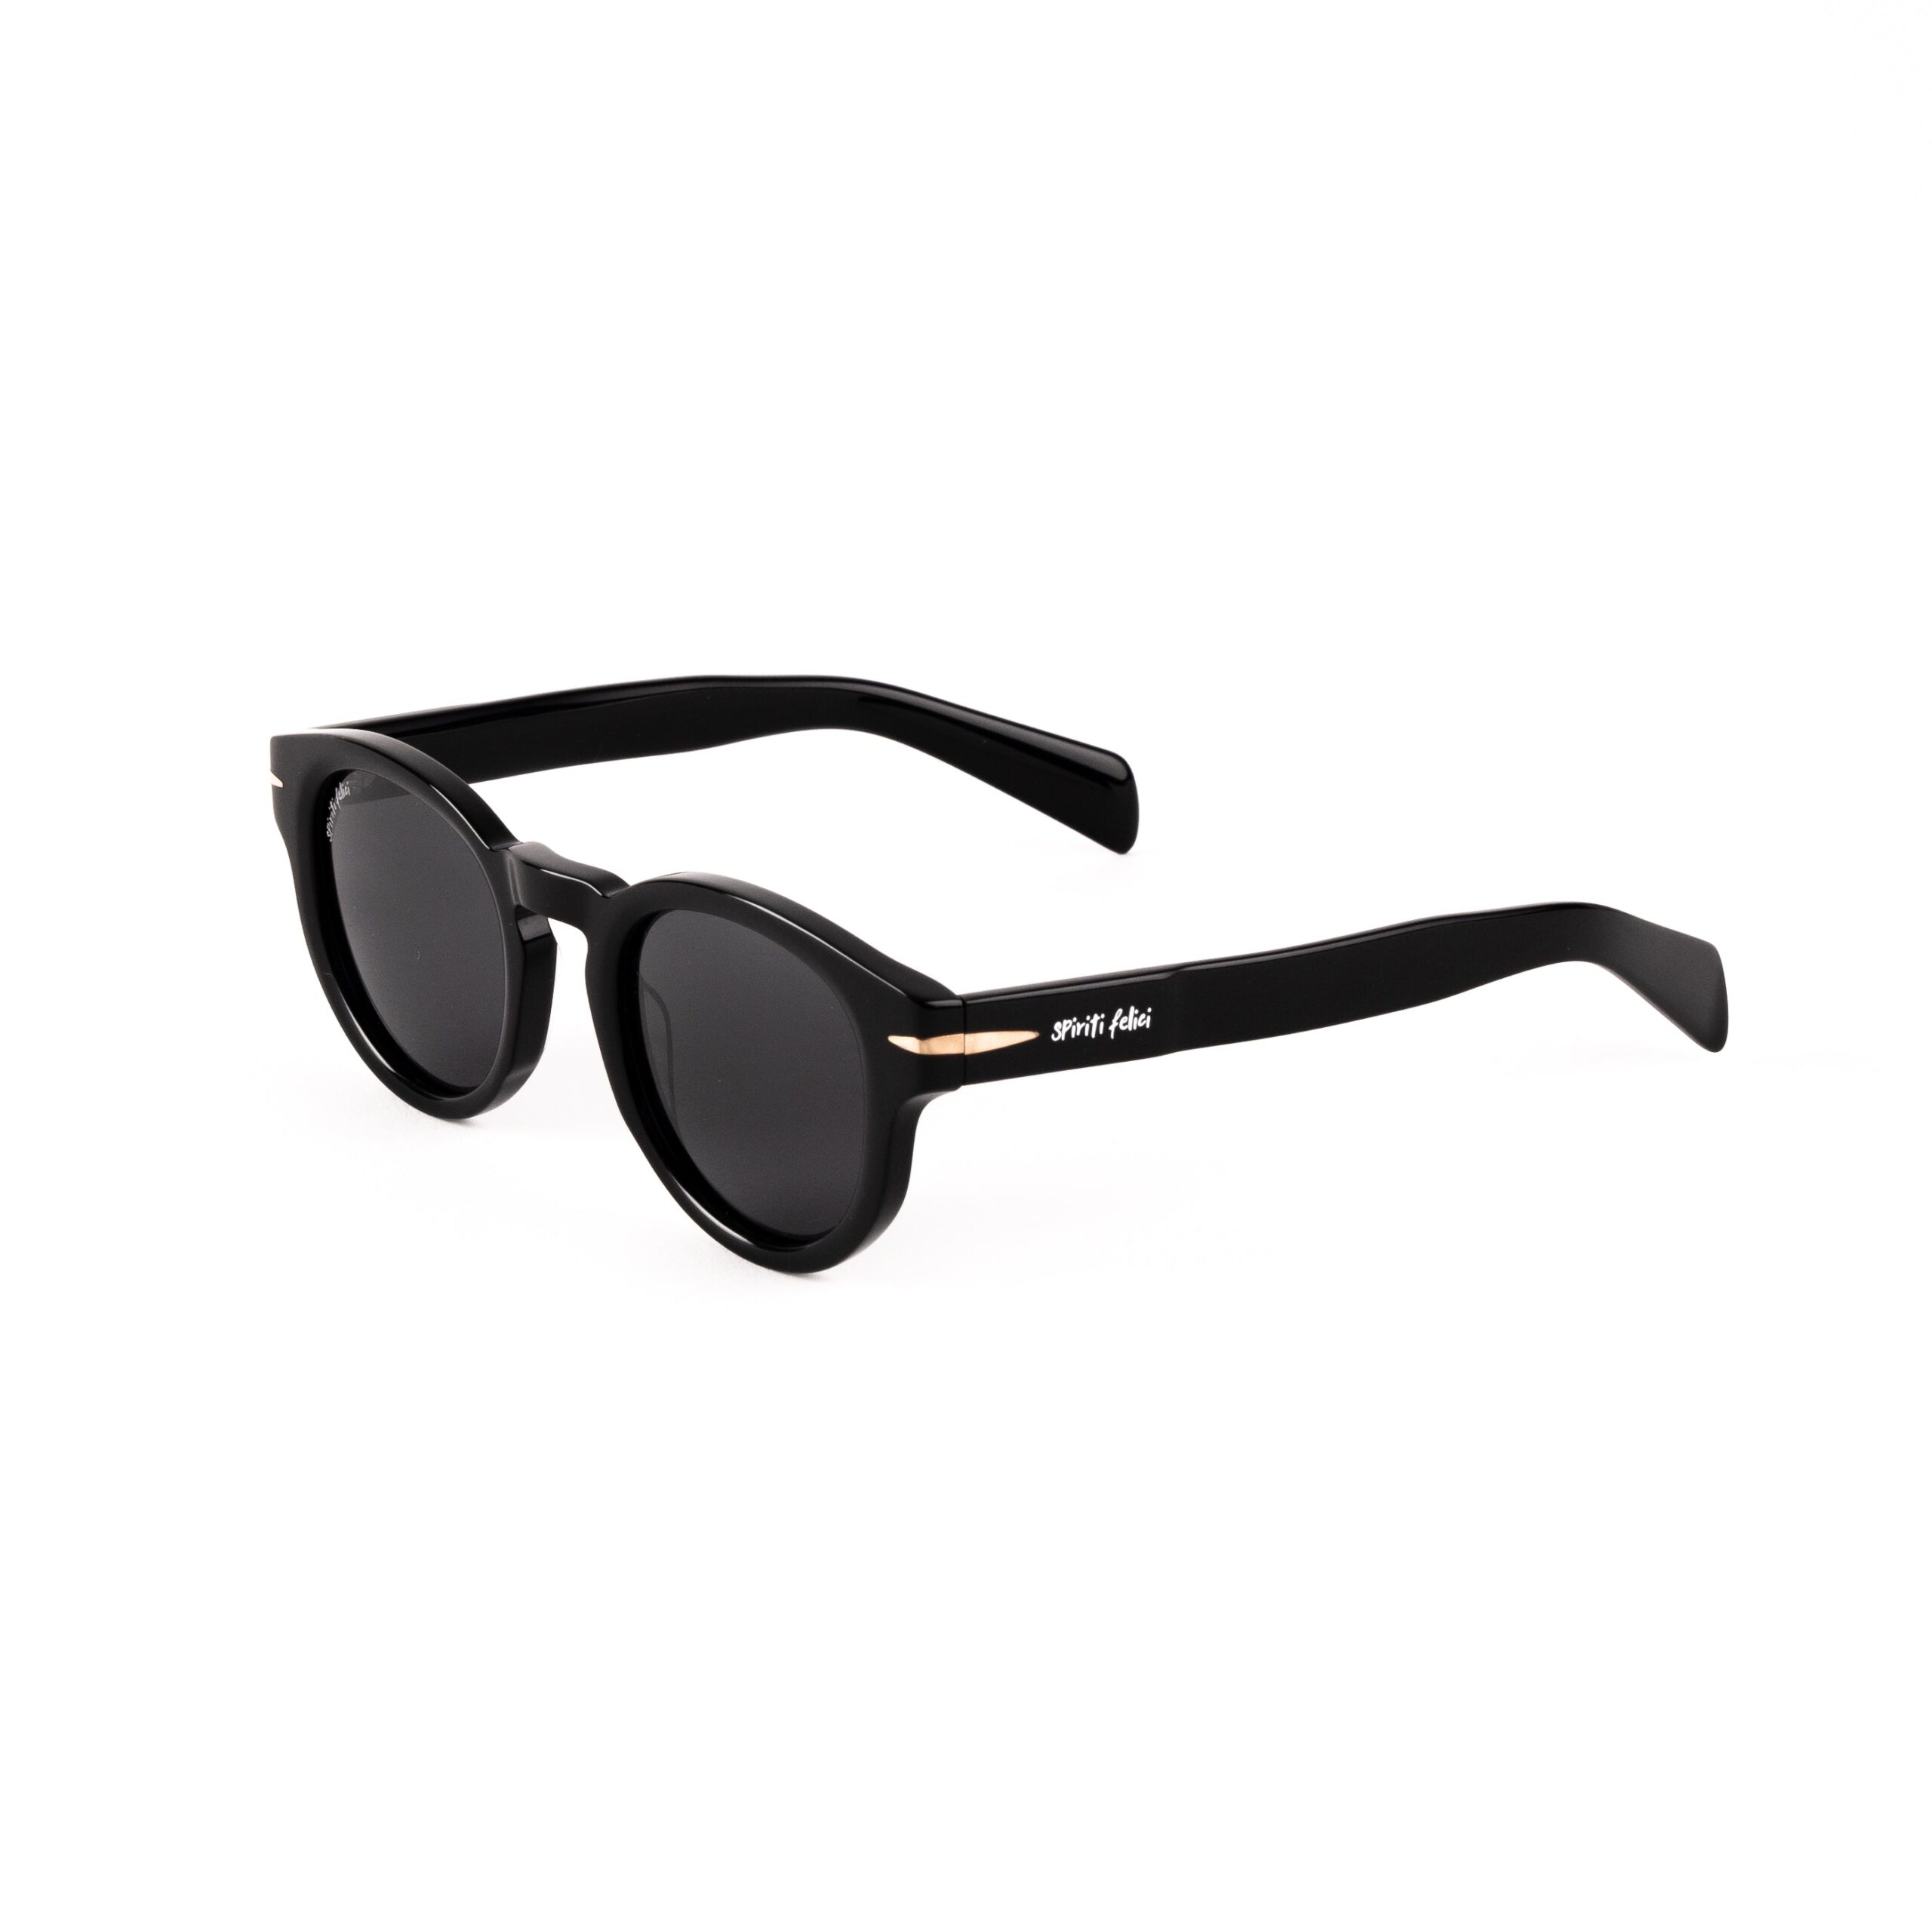 Buy CRADLE Sunglasses from Spiriti Felici available online at VEND. Explore more product category collections now